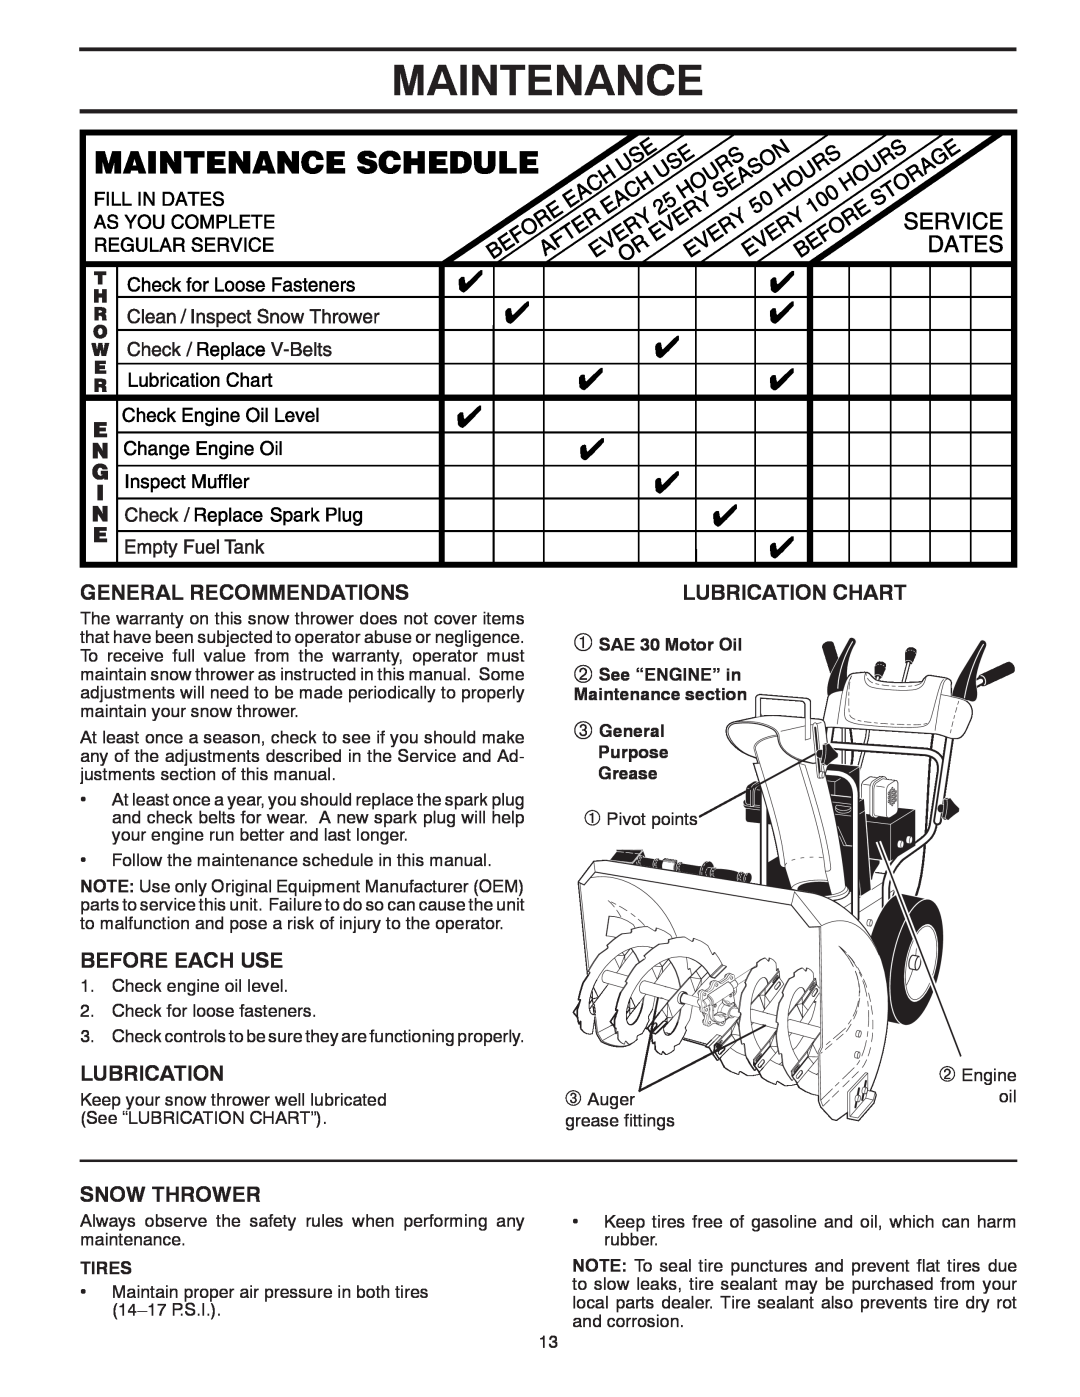 Poulan 96192002802 Maintenance, General Recommendations, Before Each Use, Snow Thrower, Lubrication Chart, Tires 